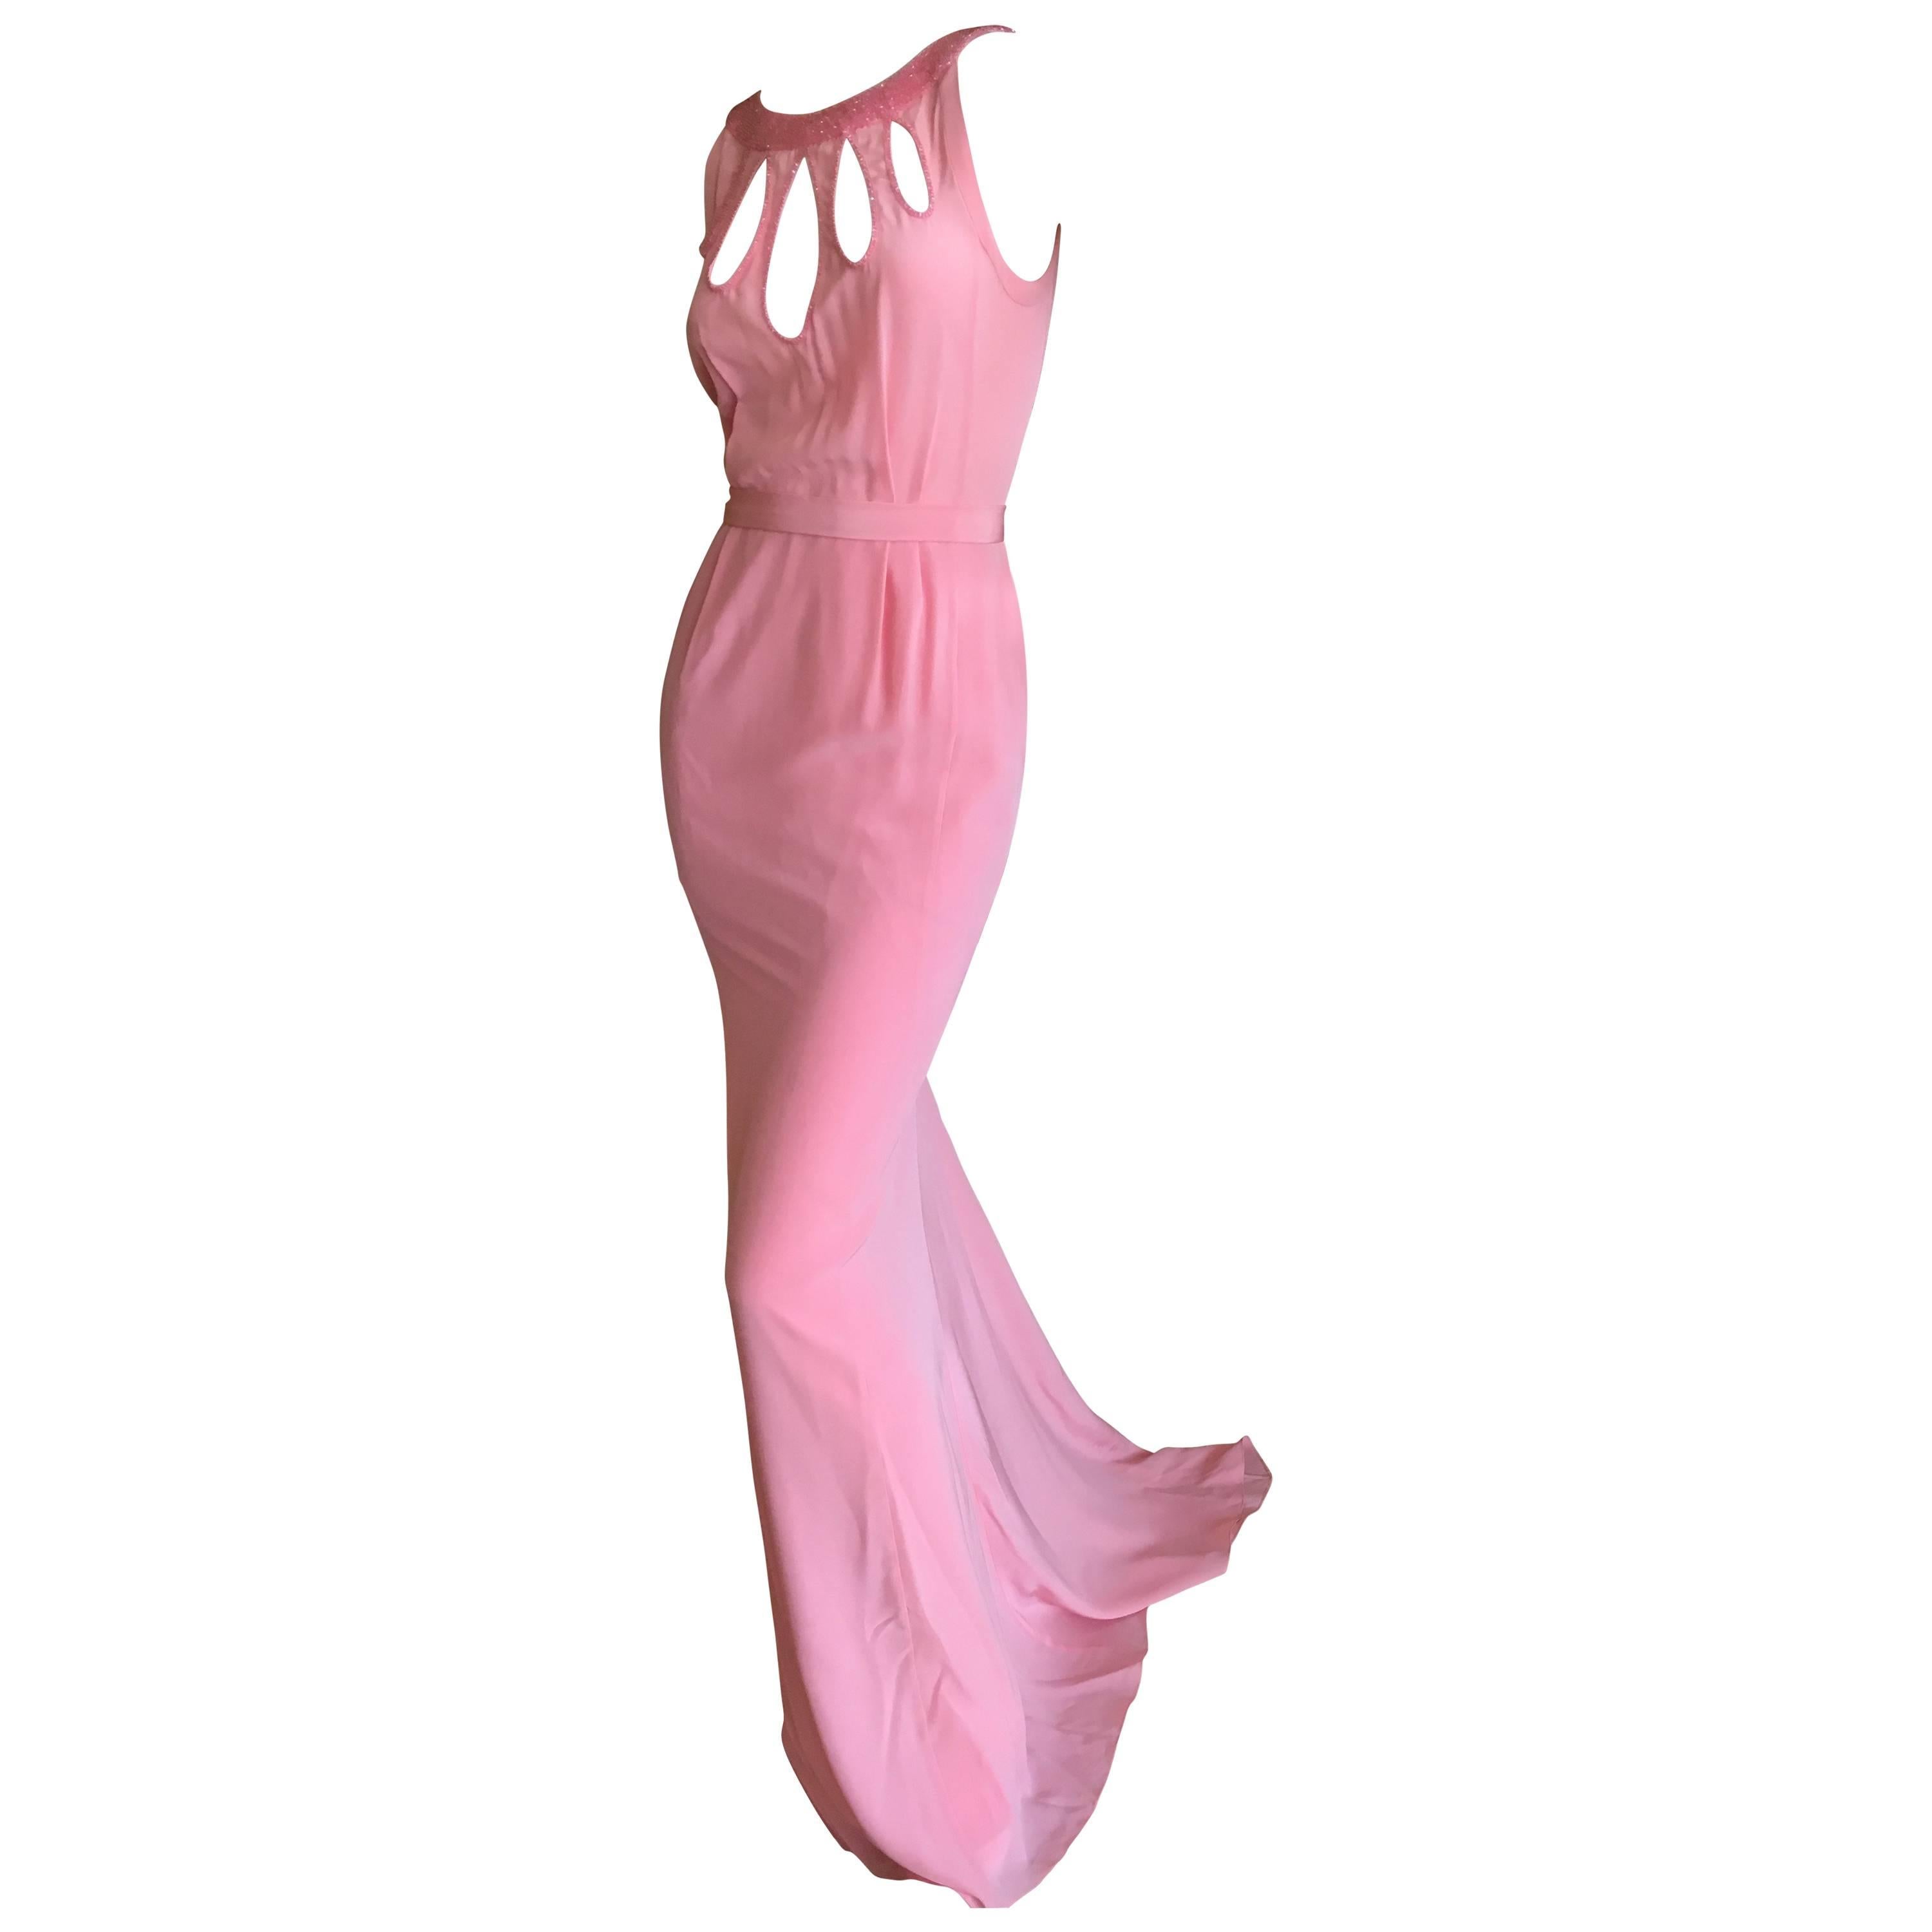 Moschino Pink Beaded Evening Dress with Keyhole Accents For Sale